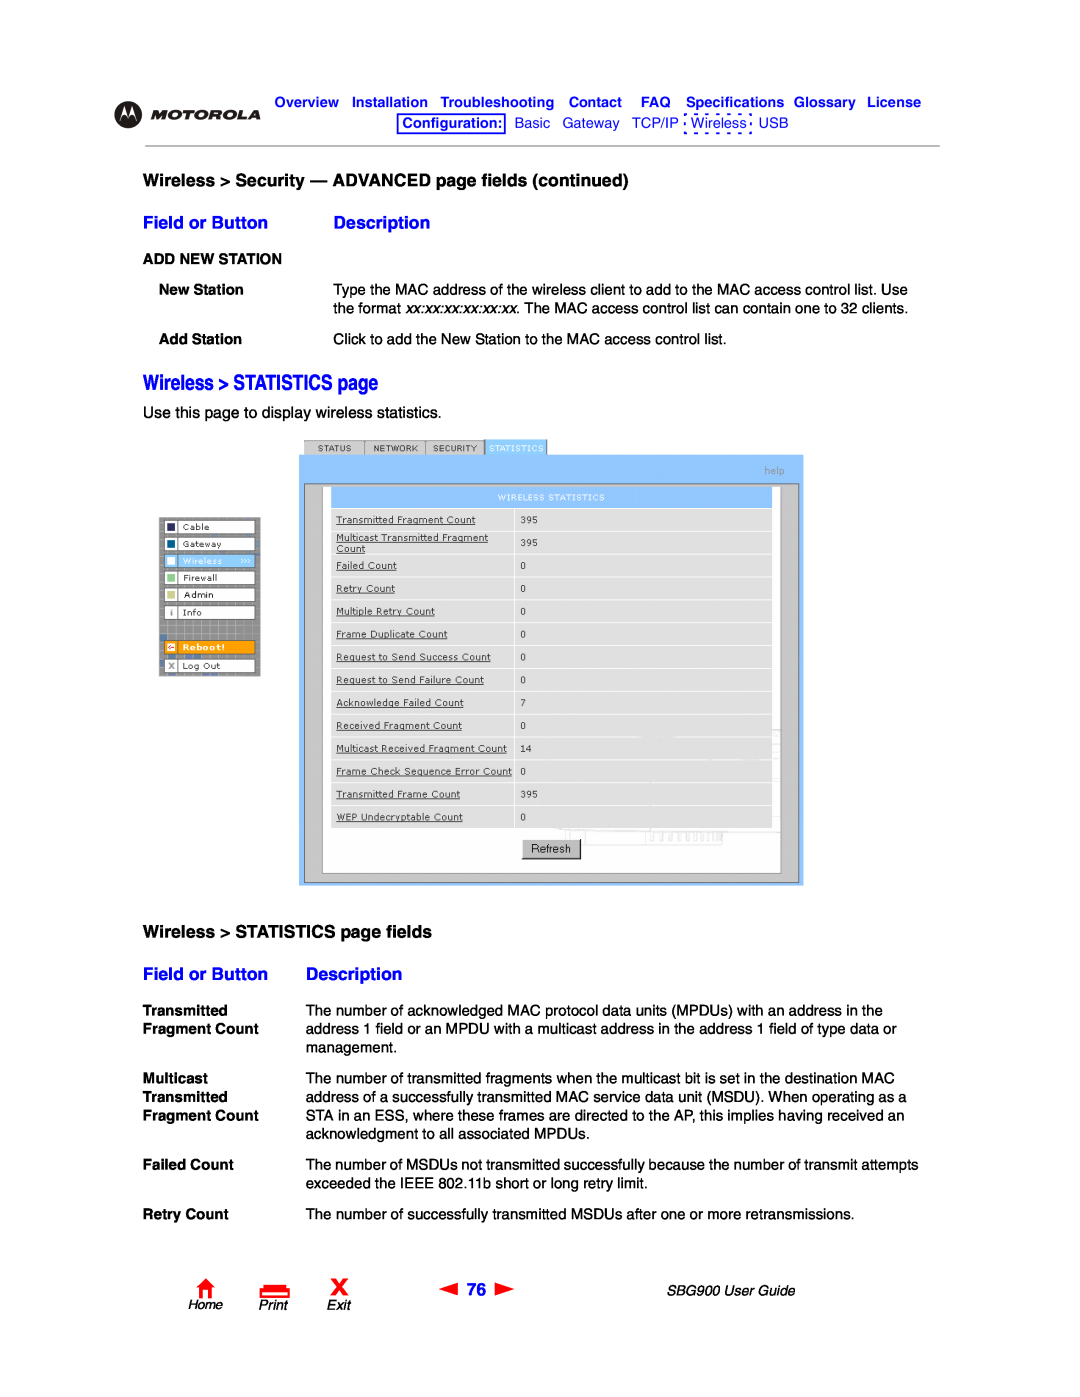 Motorola SBG900 Wireless STATISTICS page, Wireless Security - ADVANCED page fields continued, Field or Button, Description 